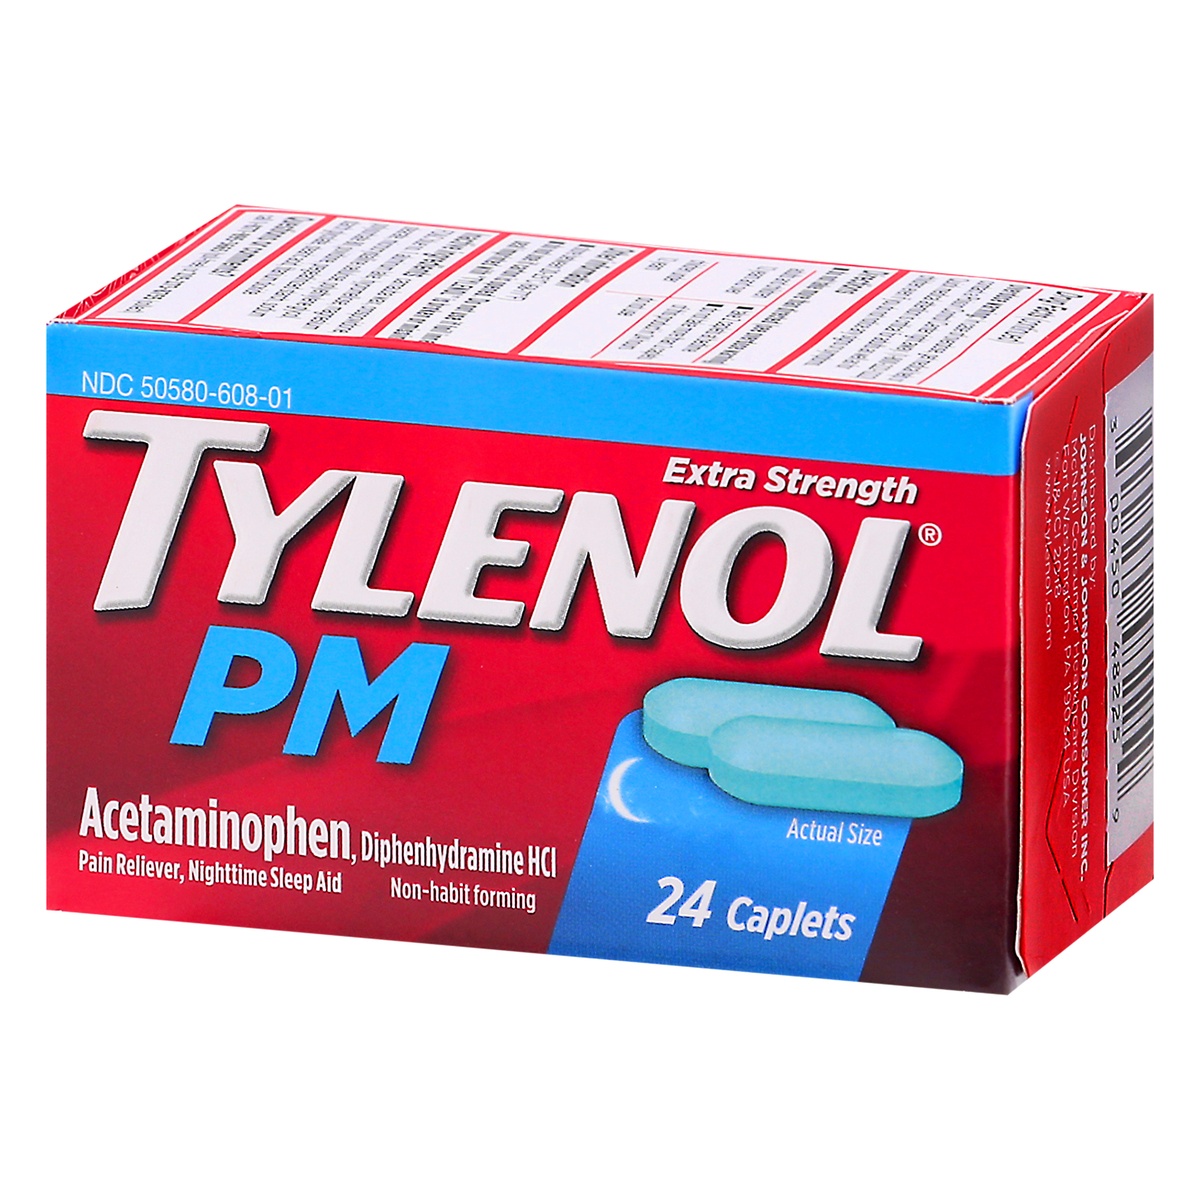 slide 3 of 10, Tylenol PM Extra Strength Nighttime Pain Reliever & Sleep Aid Caplets Acetaminophen & Diphenhydramine HCl, Relief for Nighttime Aches & Pains, Non-Habit Forming, 24 ct